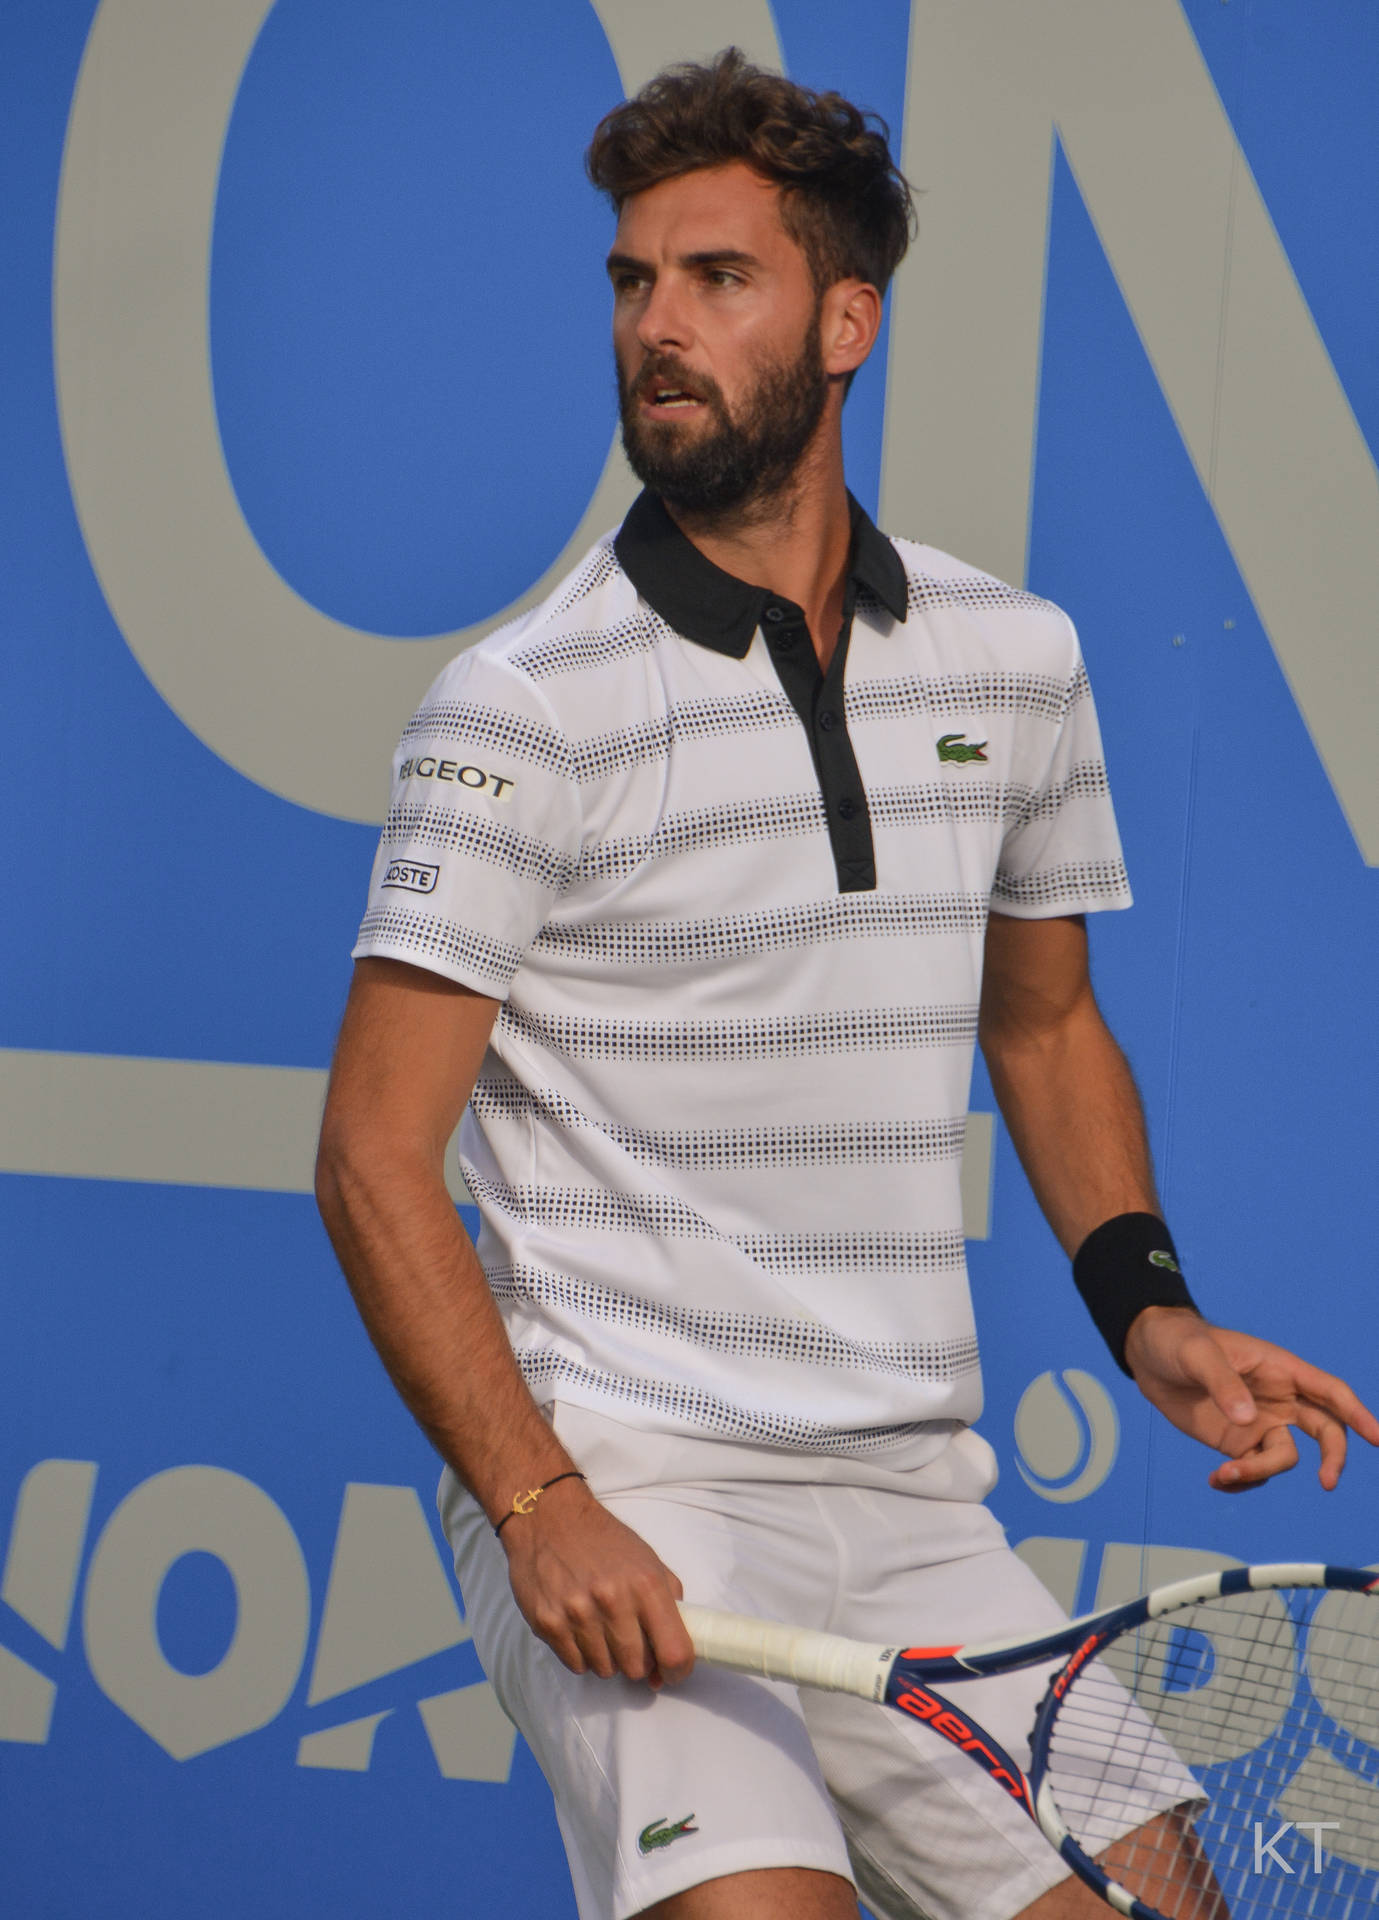 Benoit Paire in action on the tennis court Wallpaper